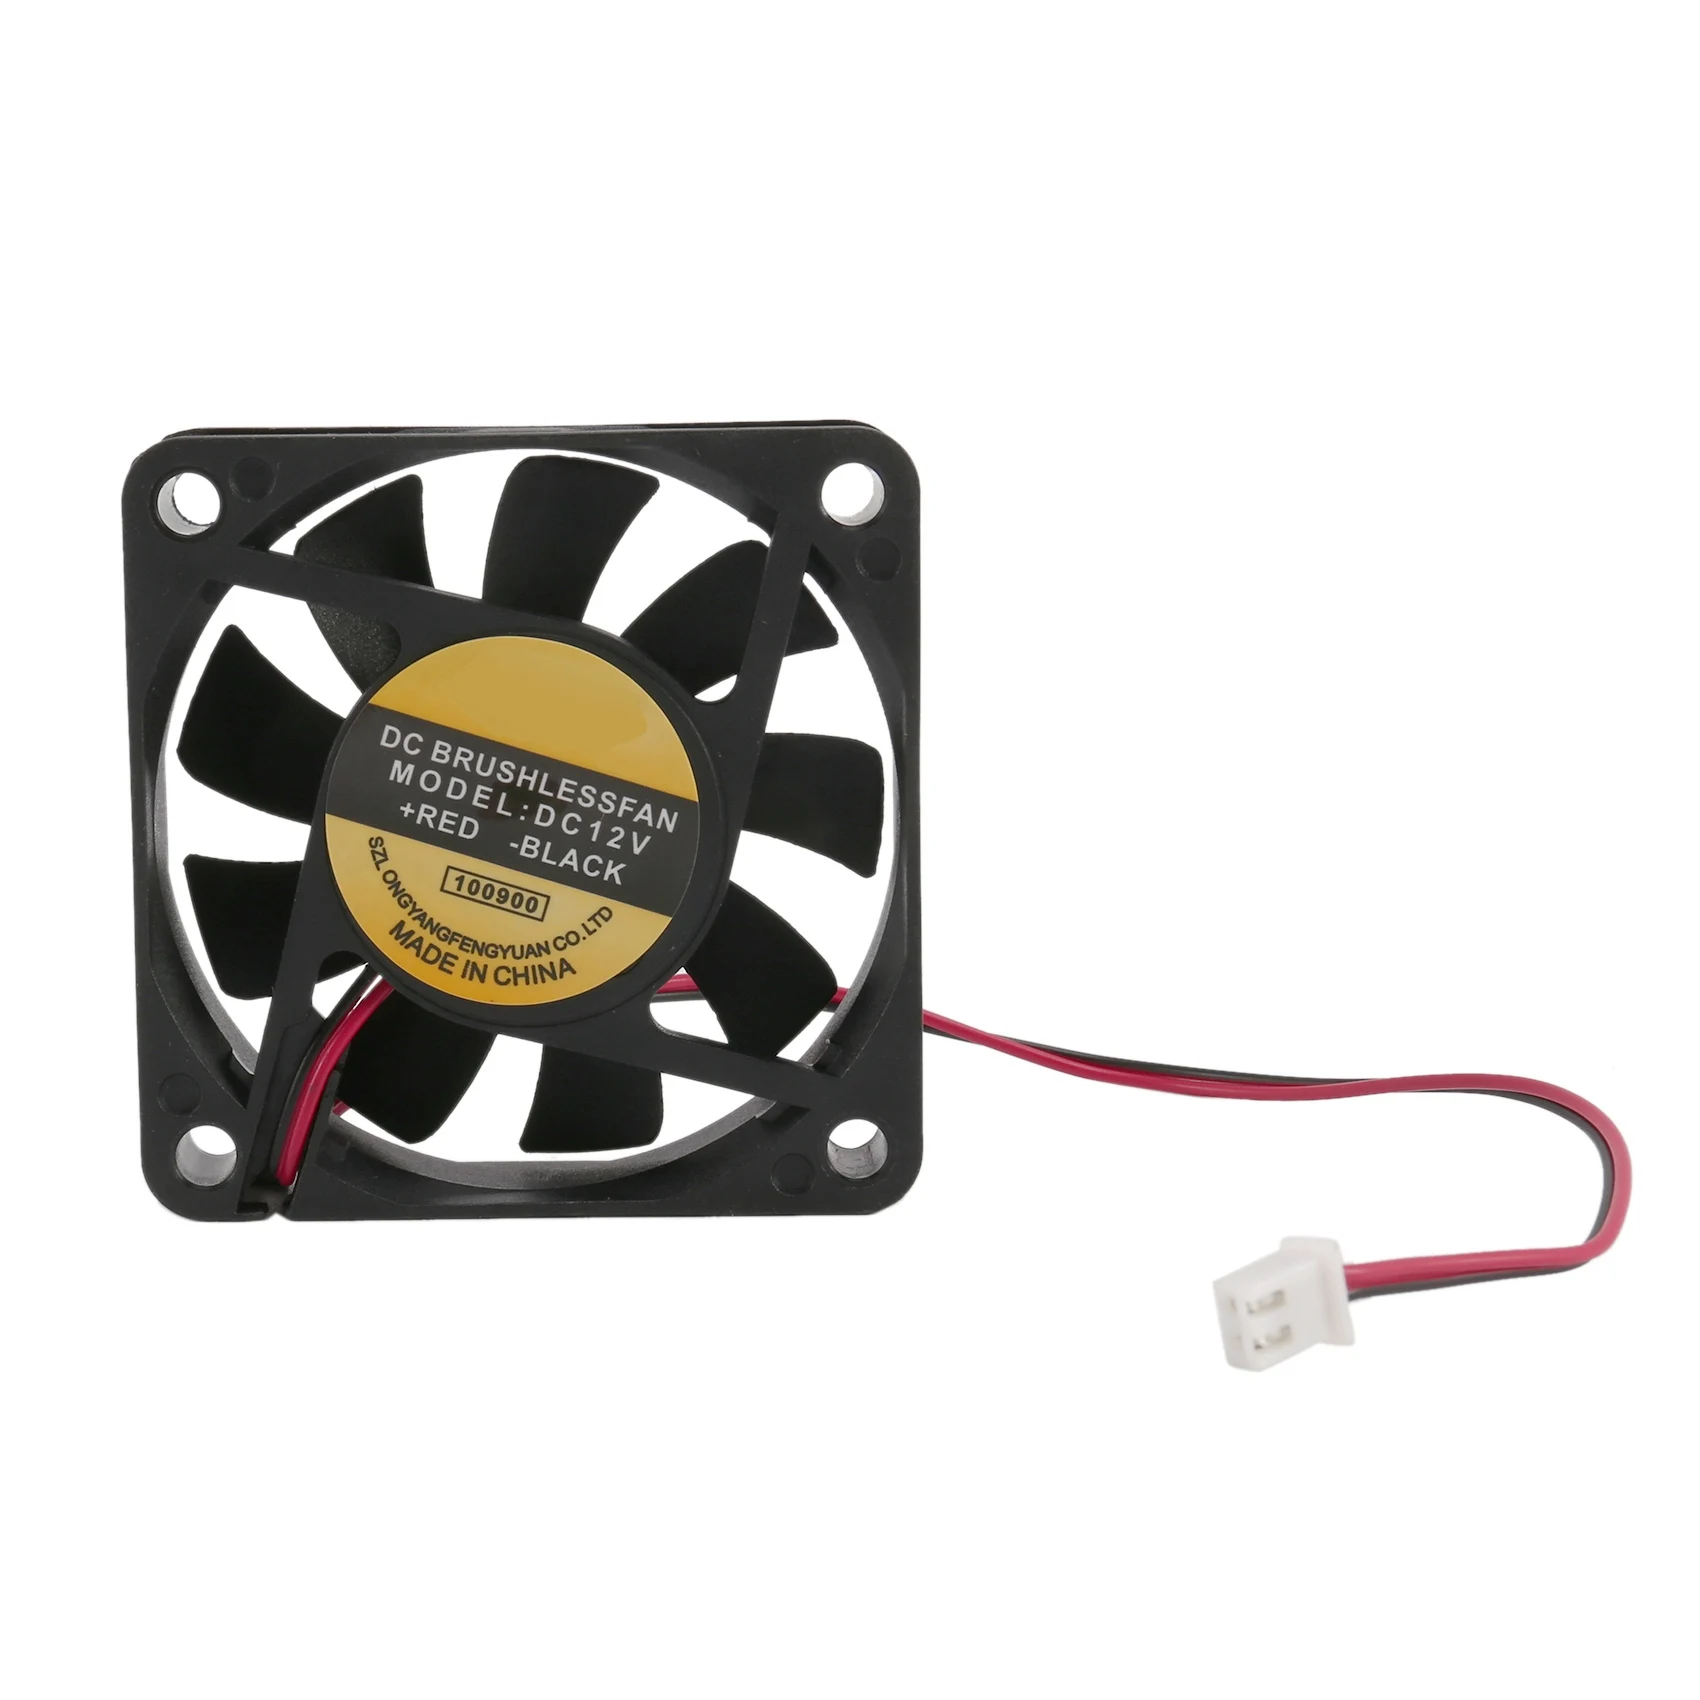 

DC 12V 2Pins Cooling Fan 60mm x 15mm for PC Computer Case CPU Cooler